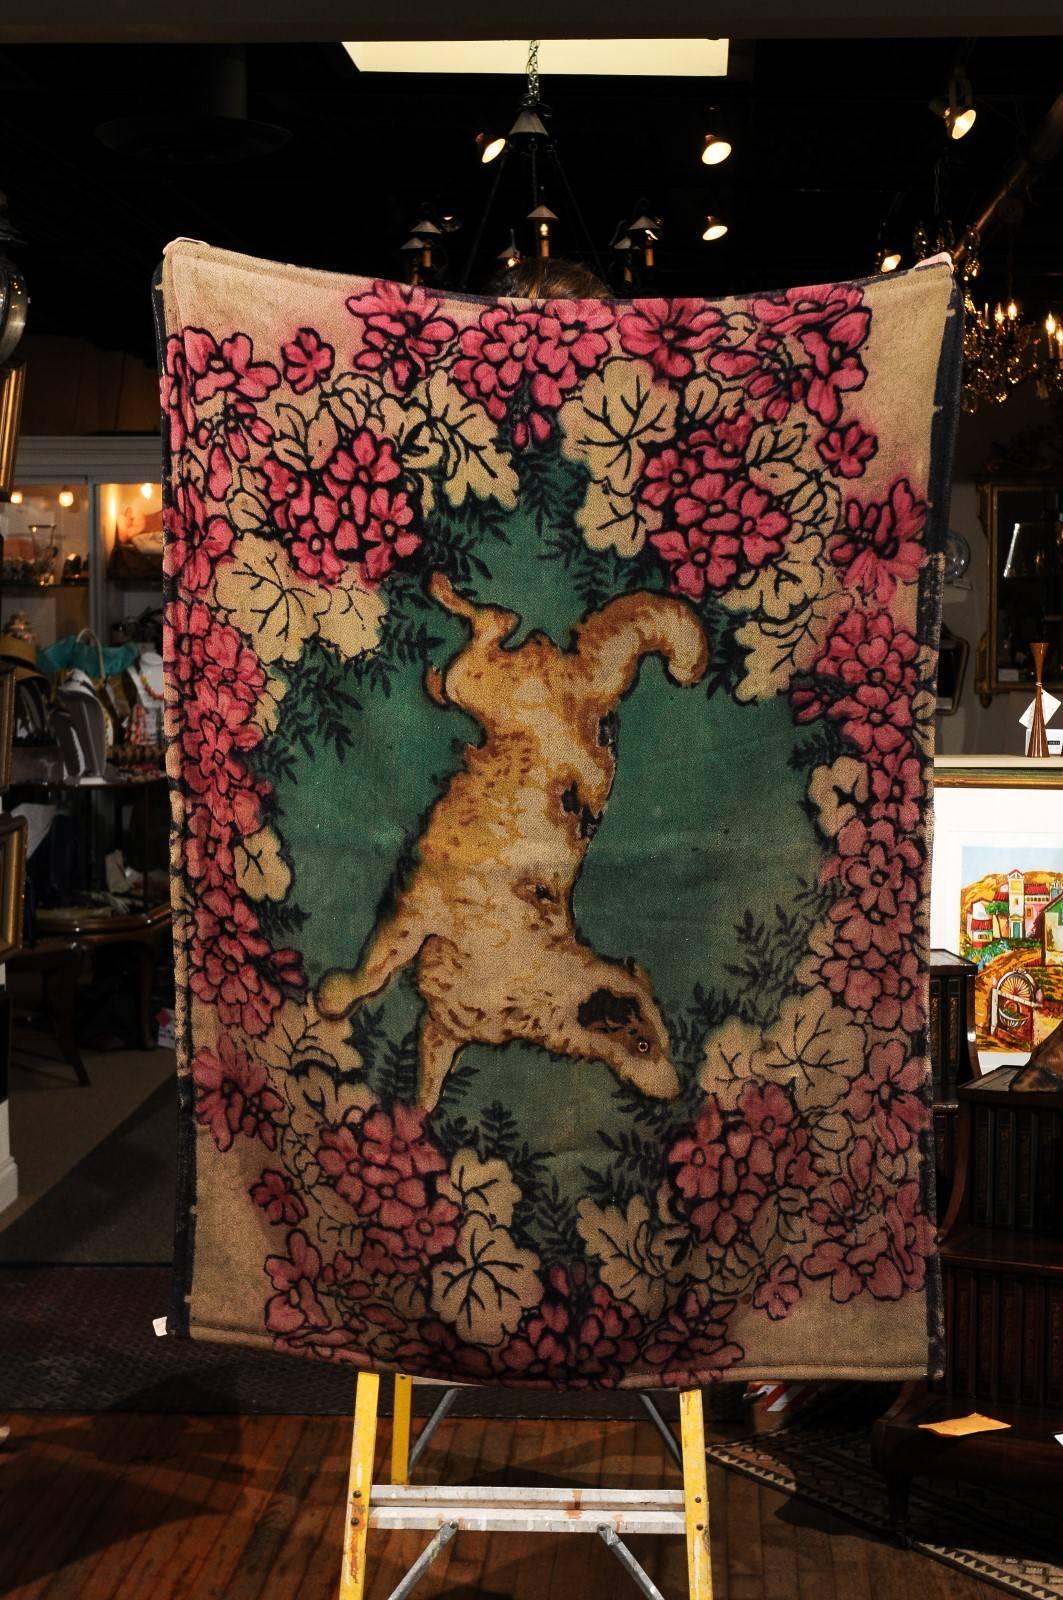 19th century Victorian wool and angora carriage blanket or lap robe. Lovely design with a wreath of flowers and garland surrounding a dog with an eye made of glass. The reverse side is dark brown. Lap robes by Chase and Company were manufactured by